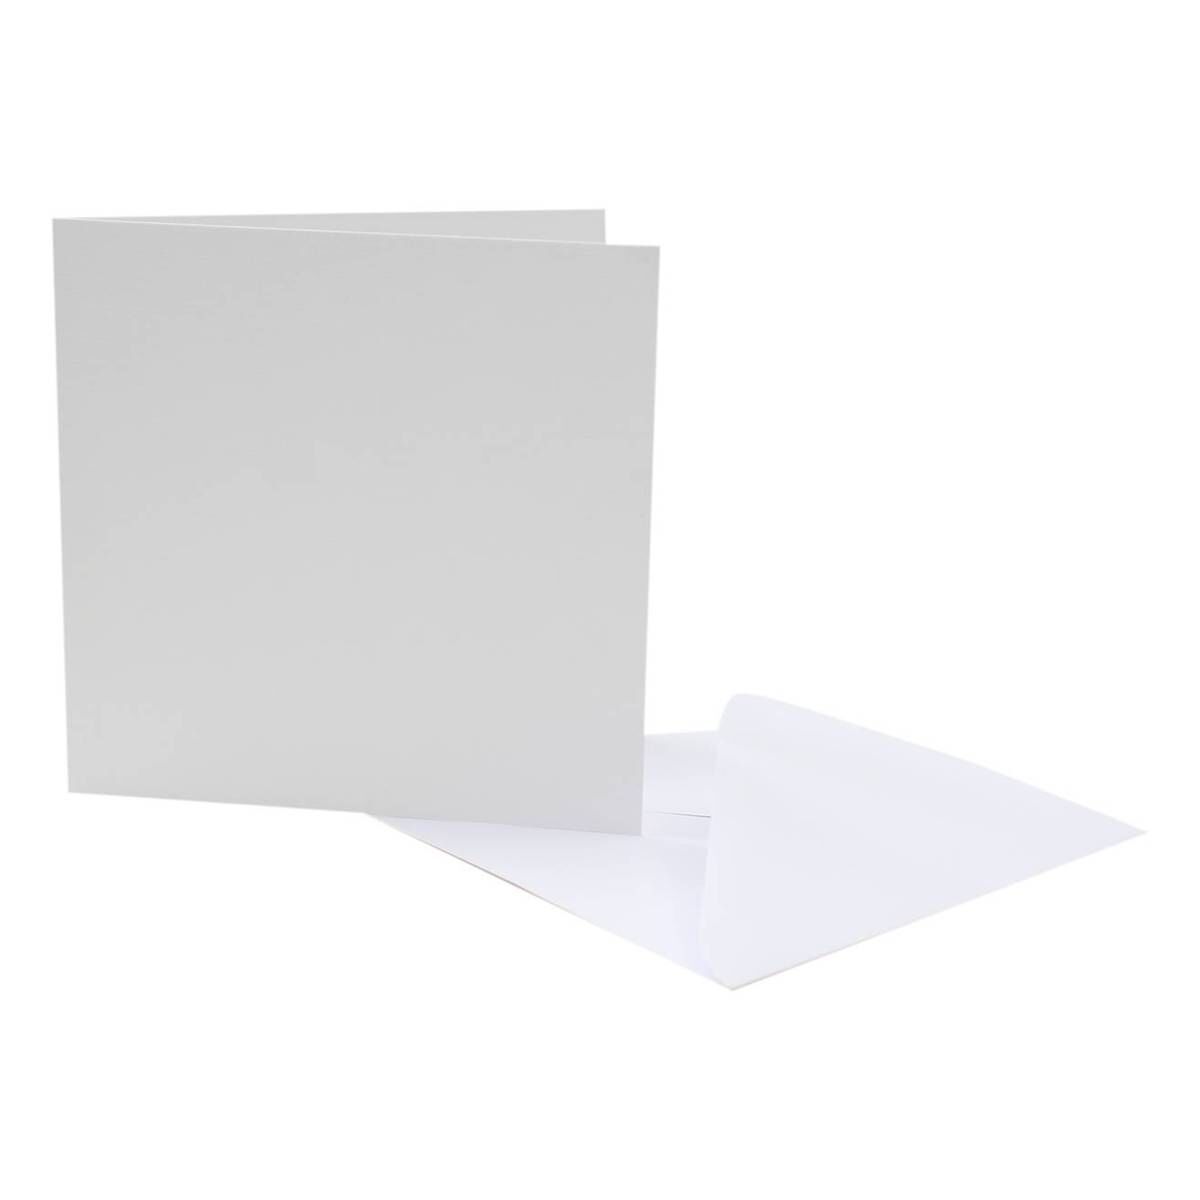 50 x White 3 x 3 Inch Square Card Blanks and Envelopes 